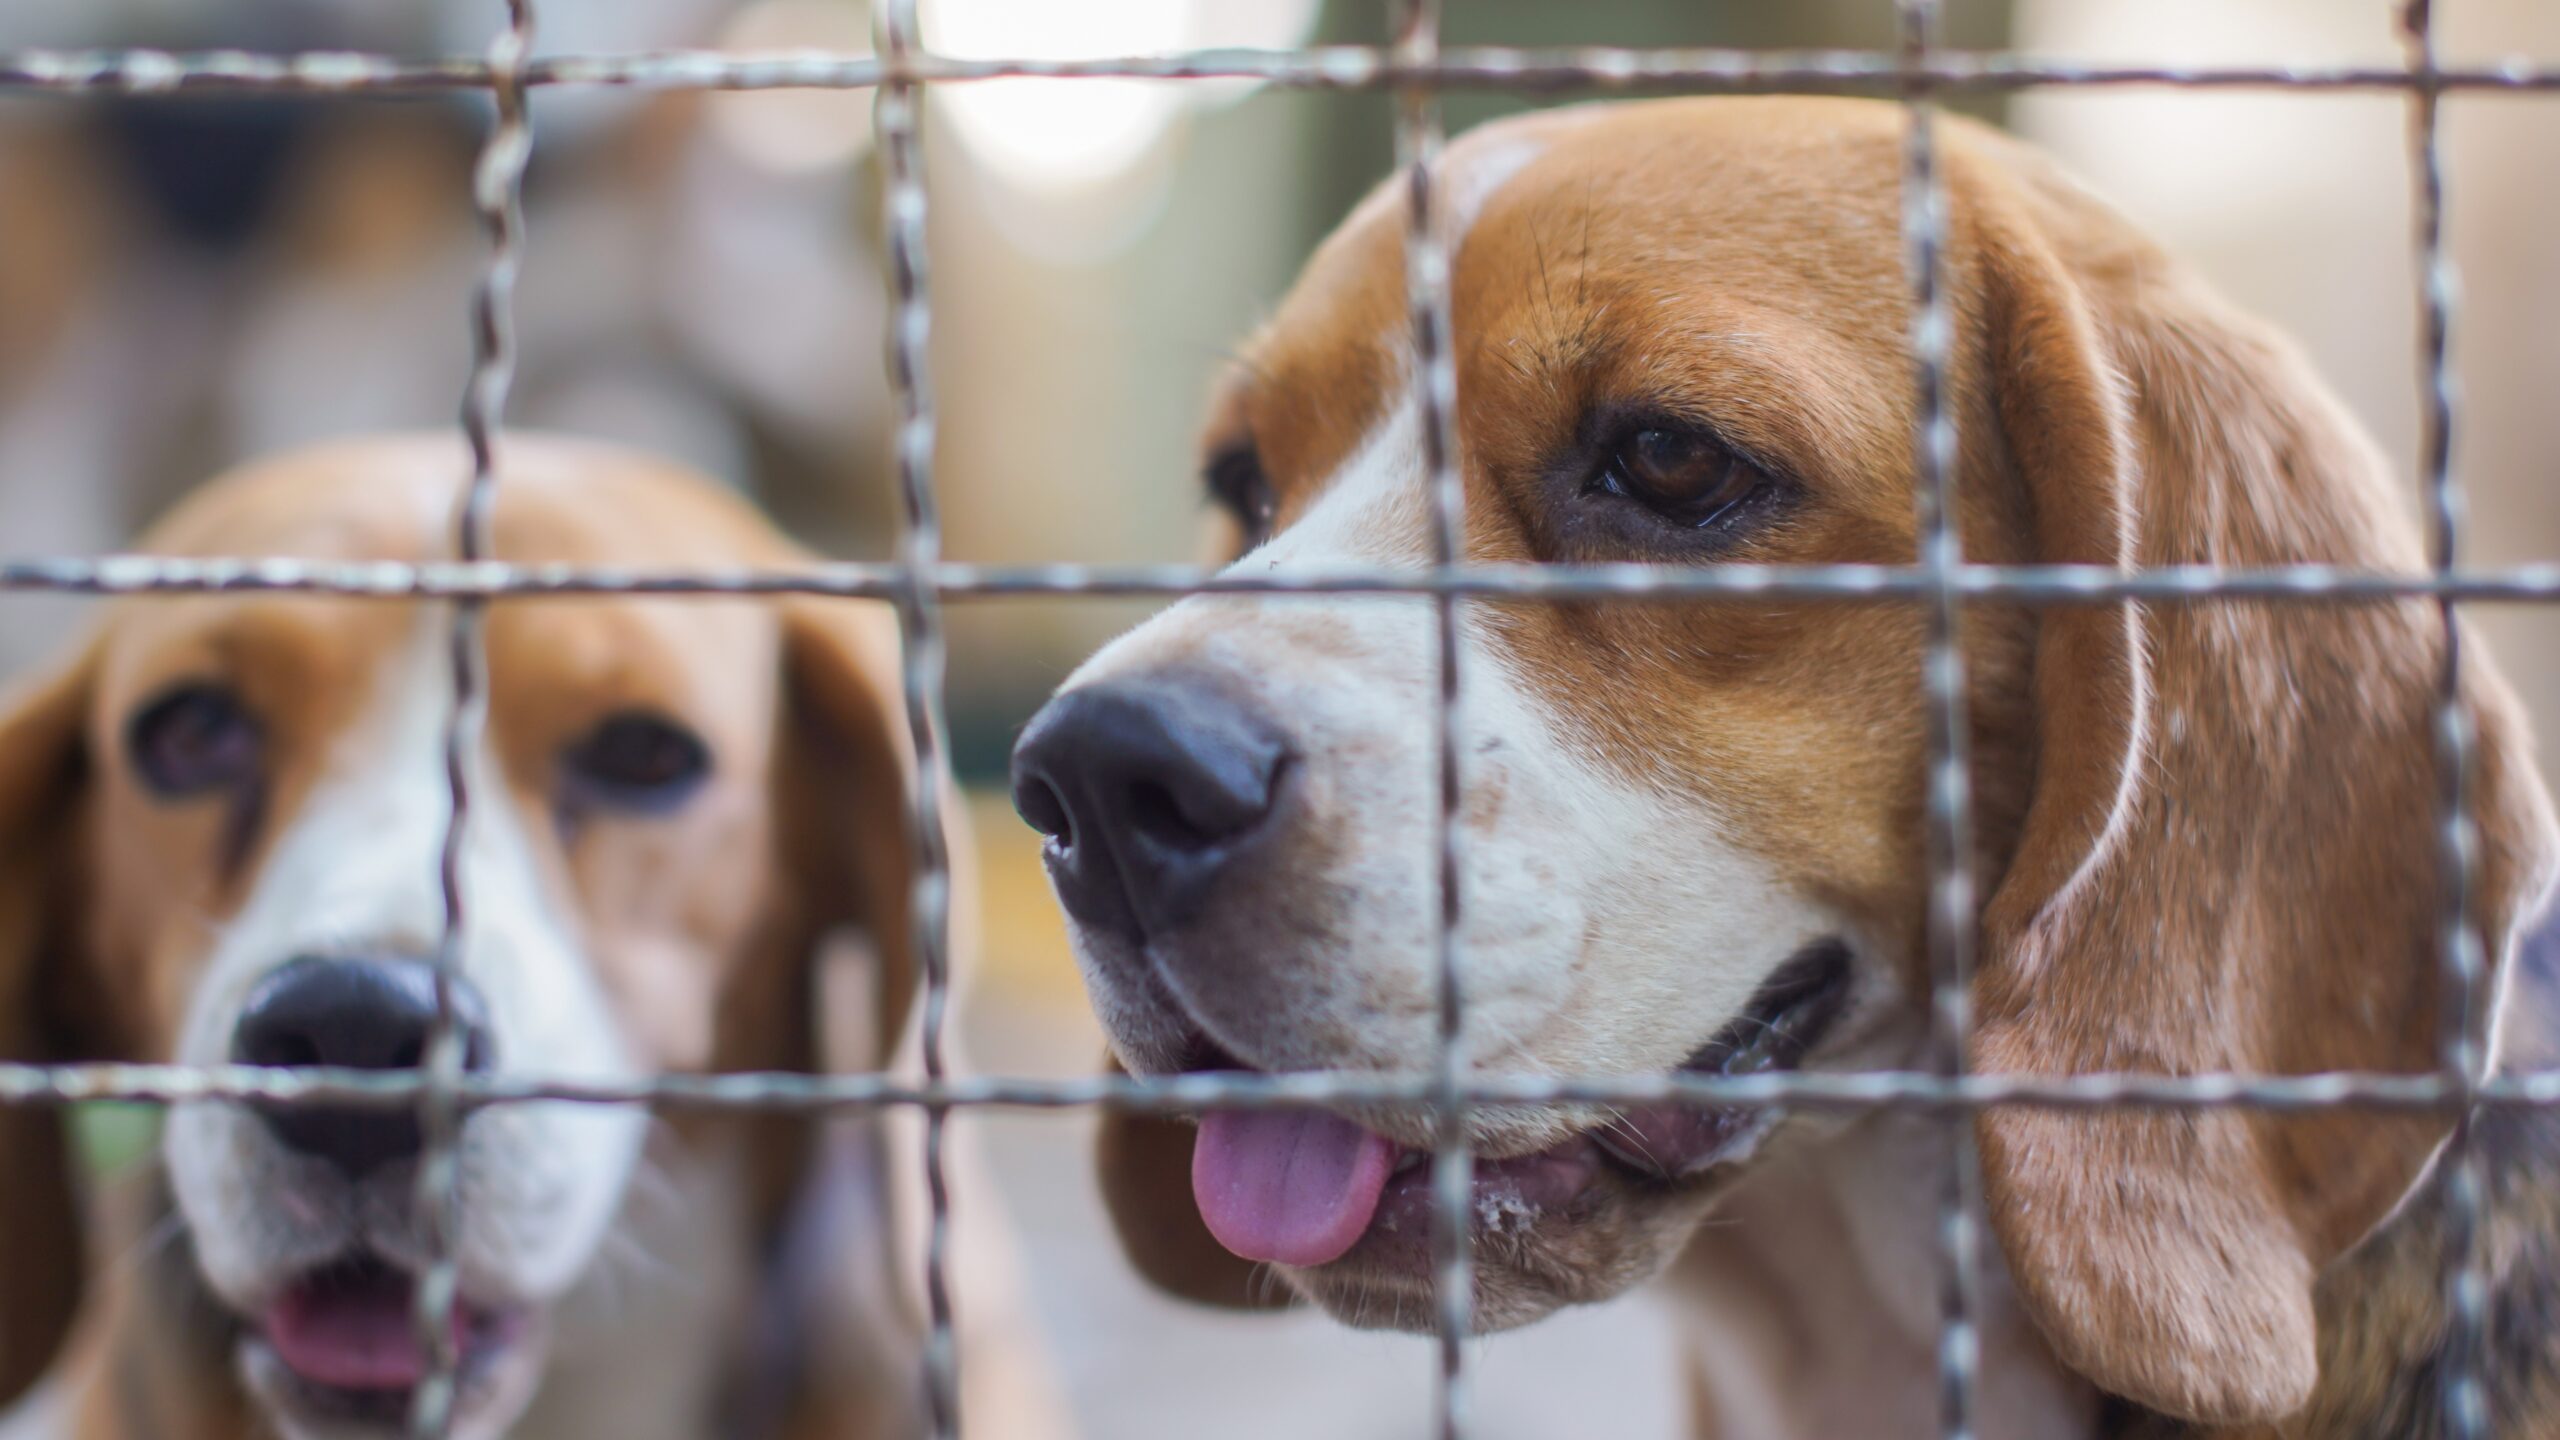 Two beagles behind a wire cage